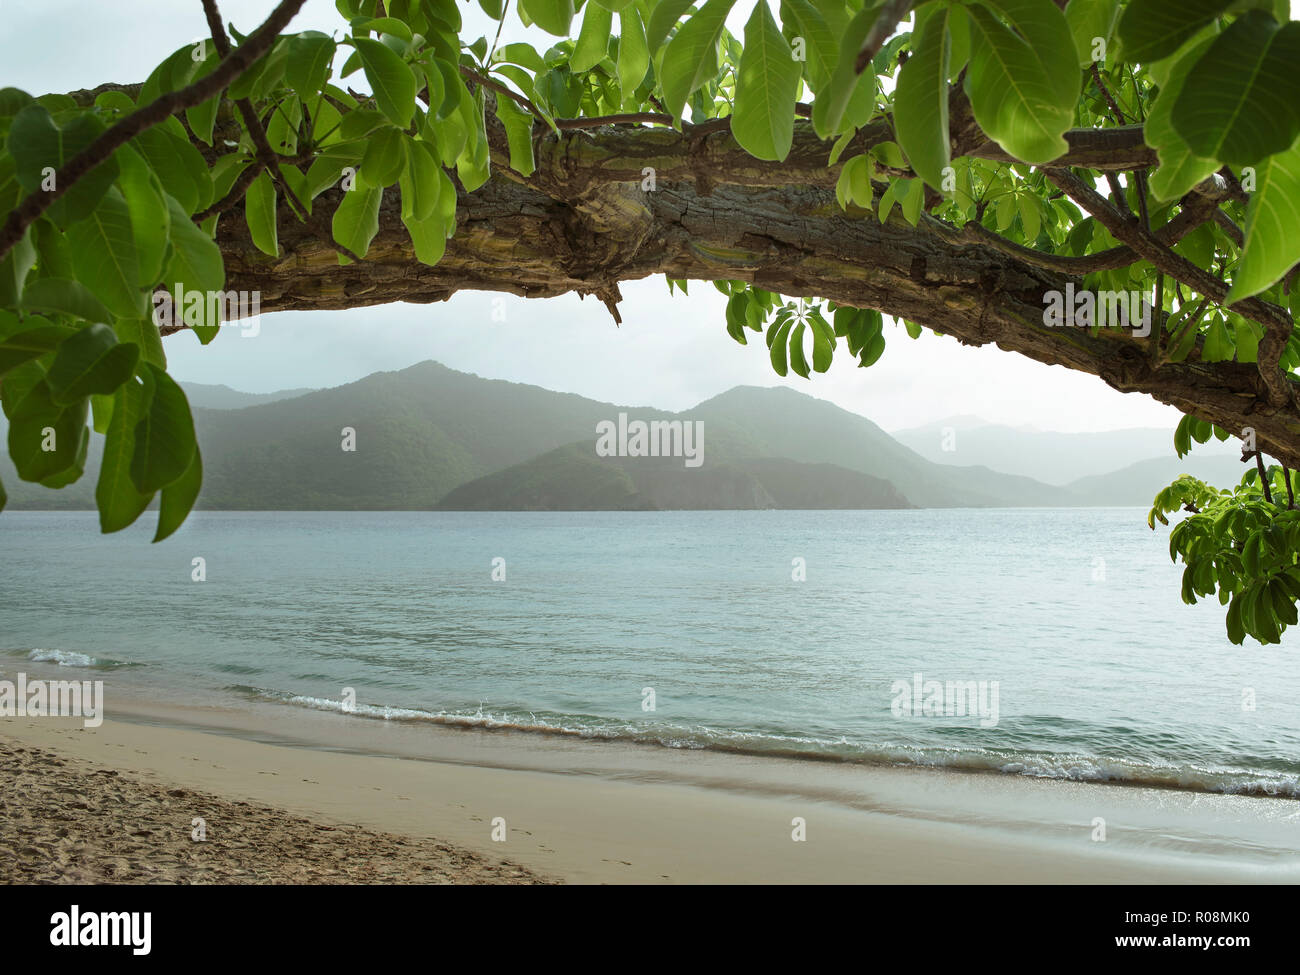 Tree branch on Playa Cristal, Tayrona National Park, Colombia. Holiday concept with copy space. Sep 2018 Stock Photo